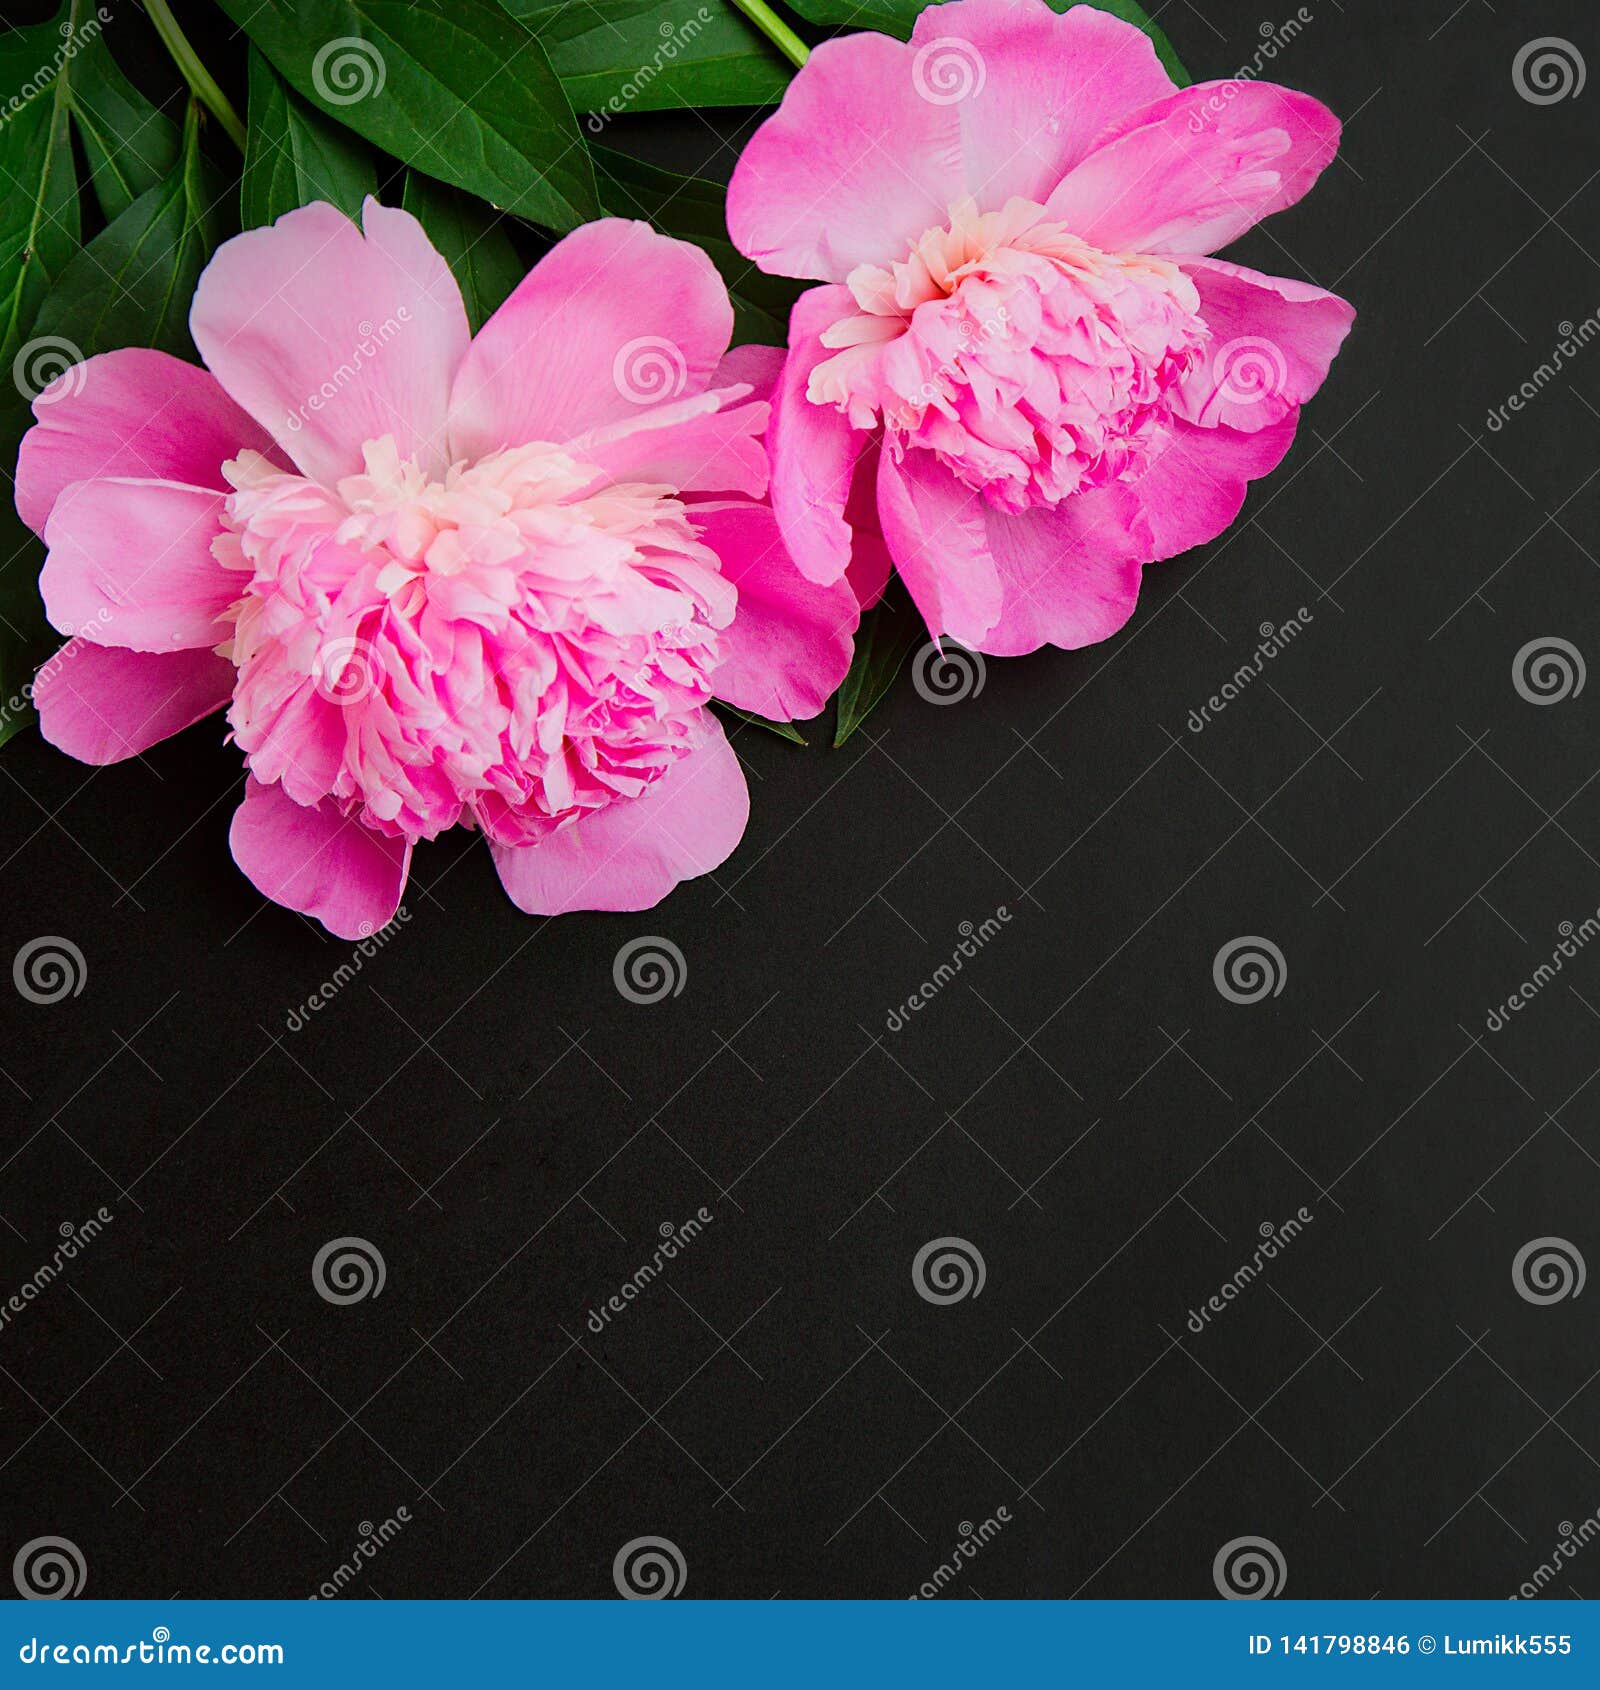 Floral Black Background With Pink Peonies Flowers Stock Photo Image Of Color Flowers 141798846